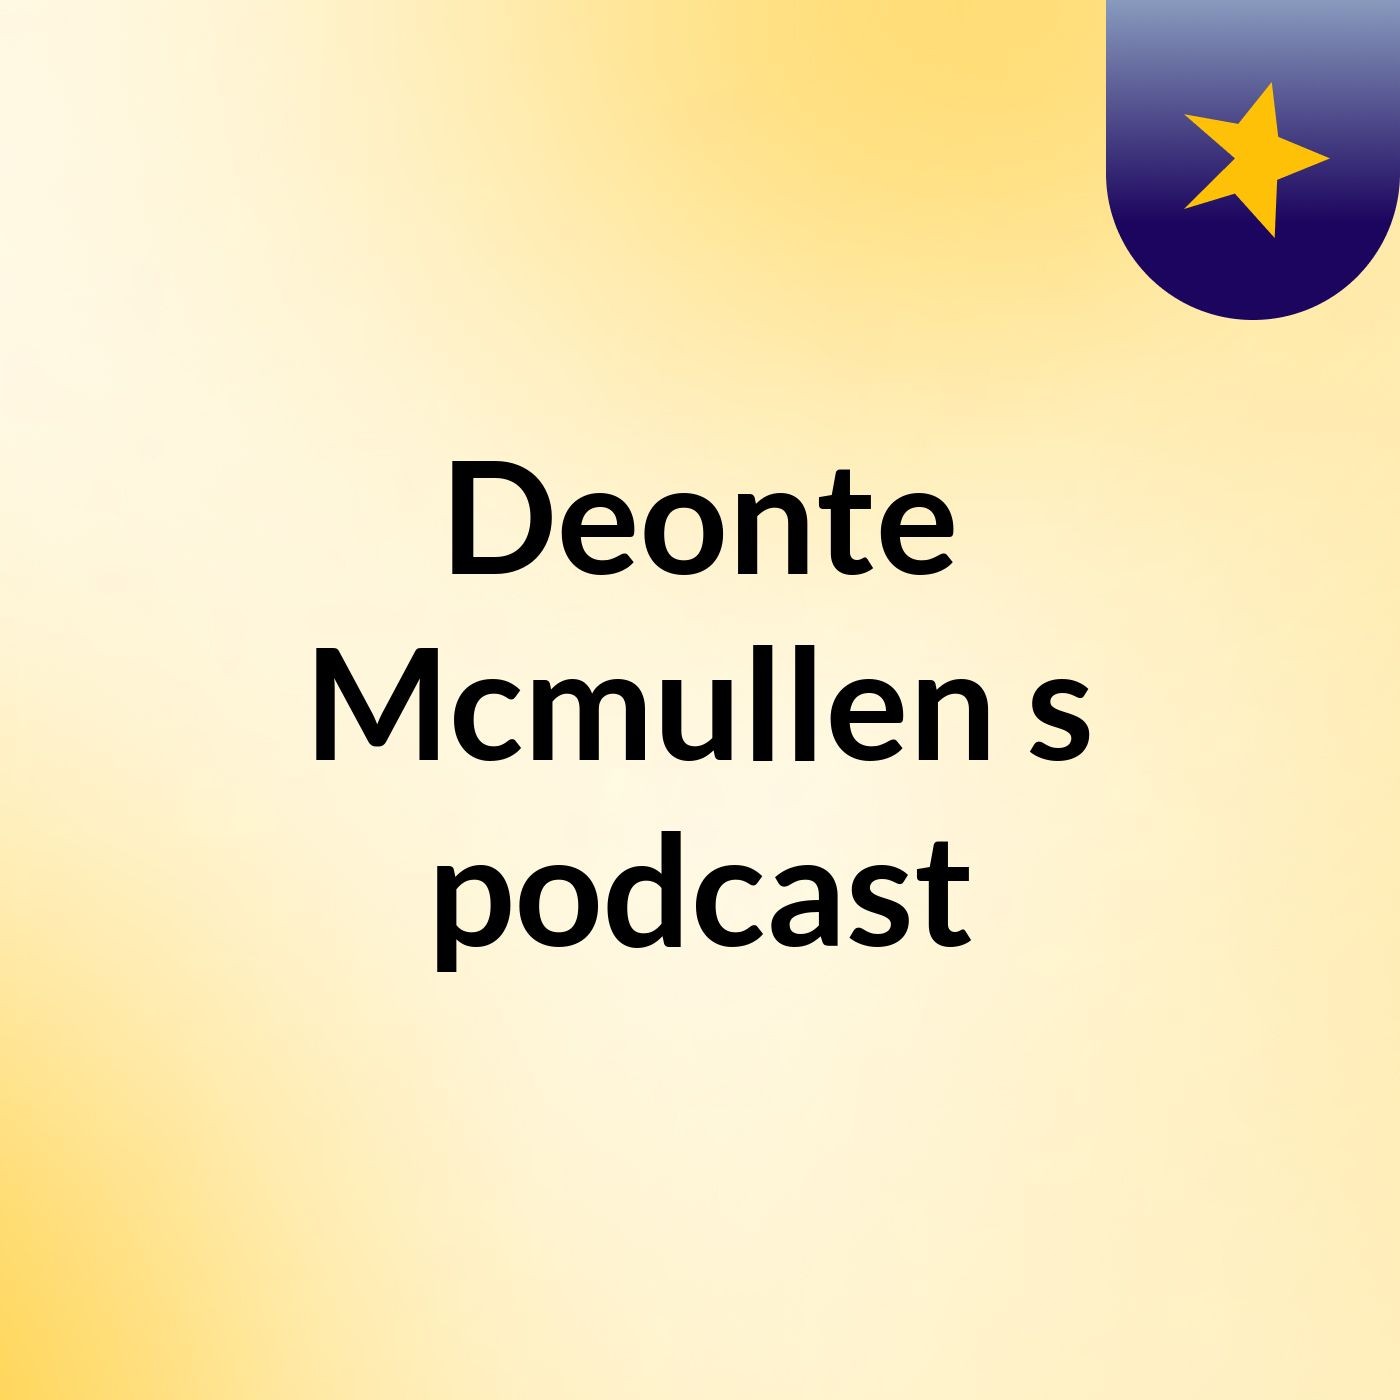 Deonte Mcmullen's podcast